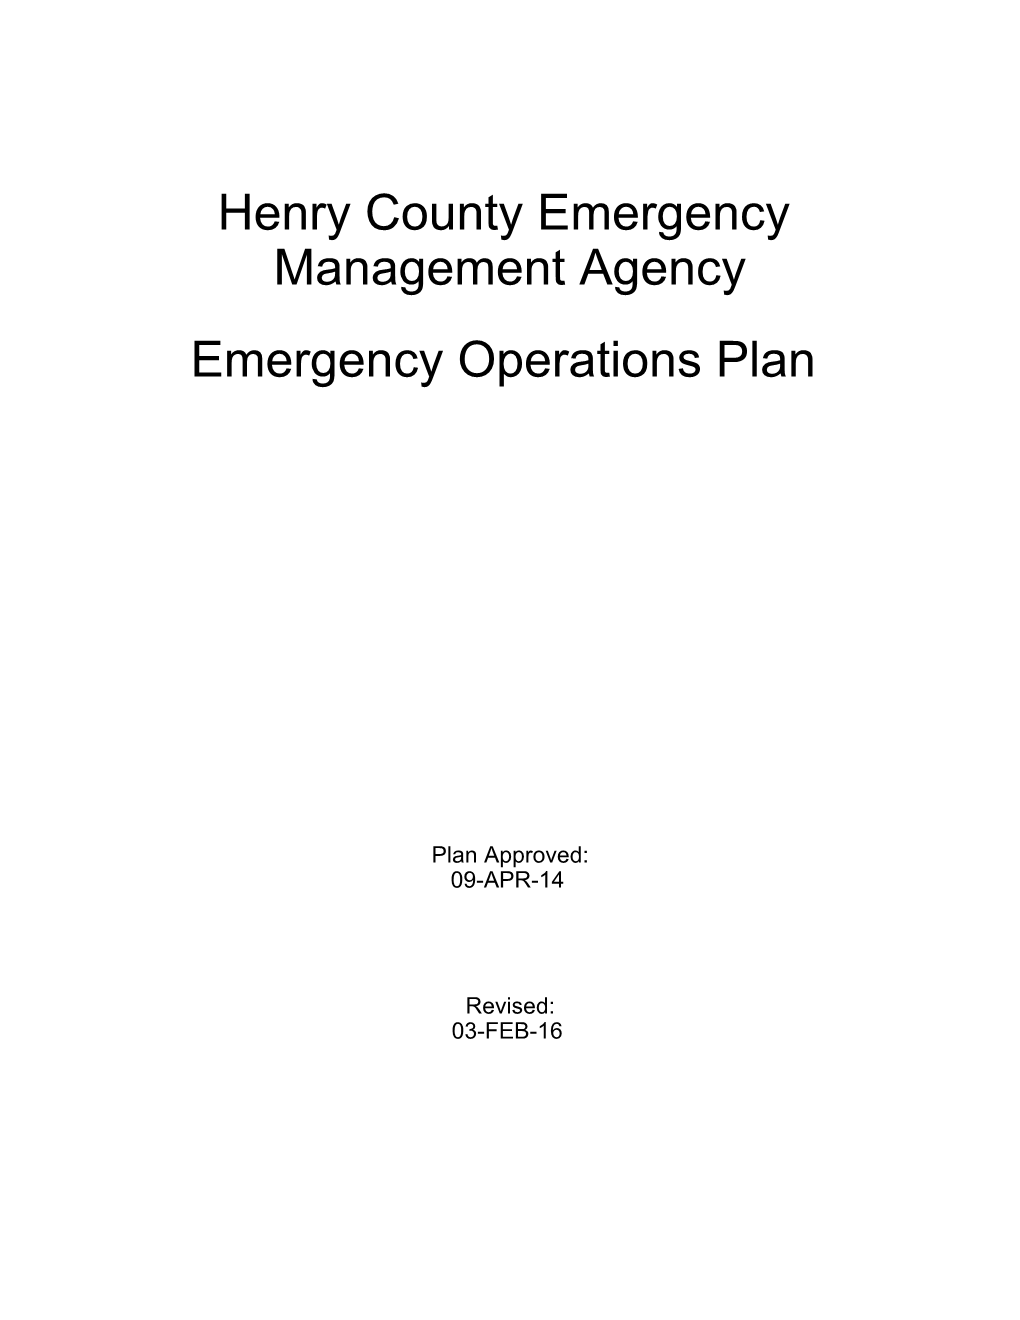 Henry County Emergency Management Agency Emergency Operations Plan